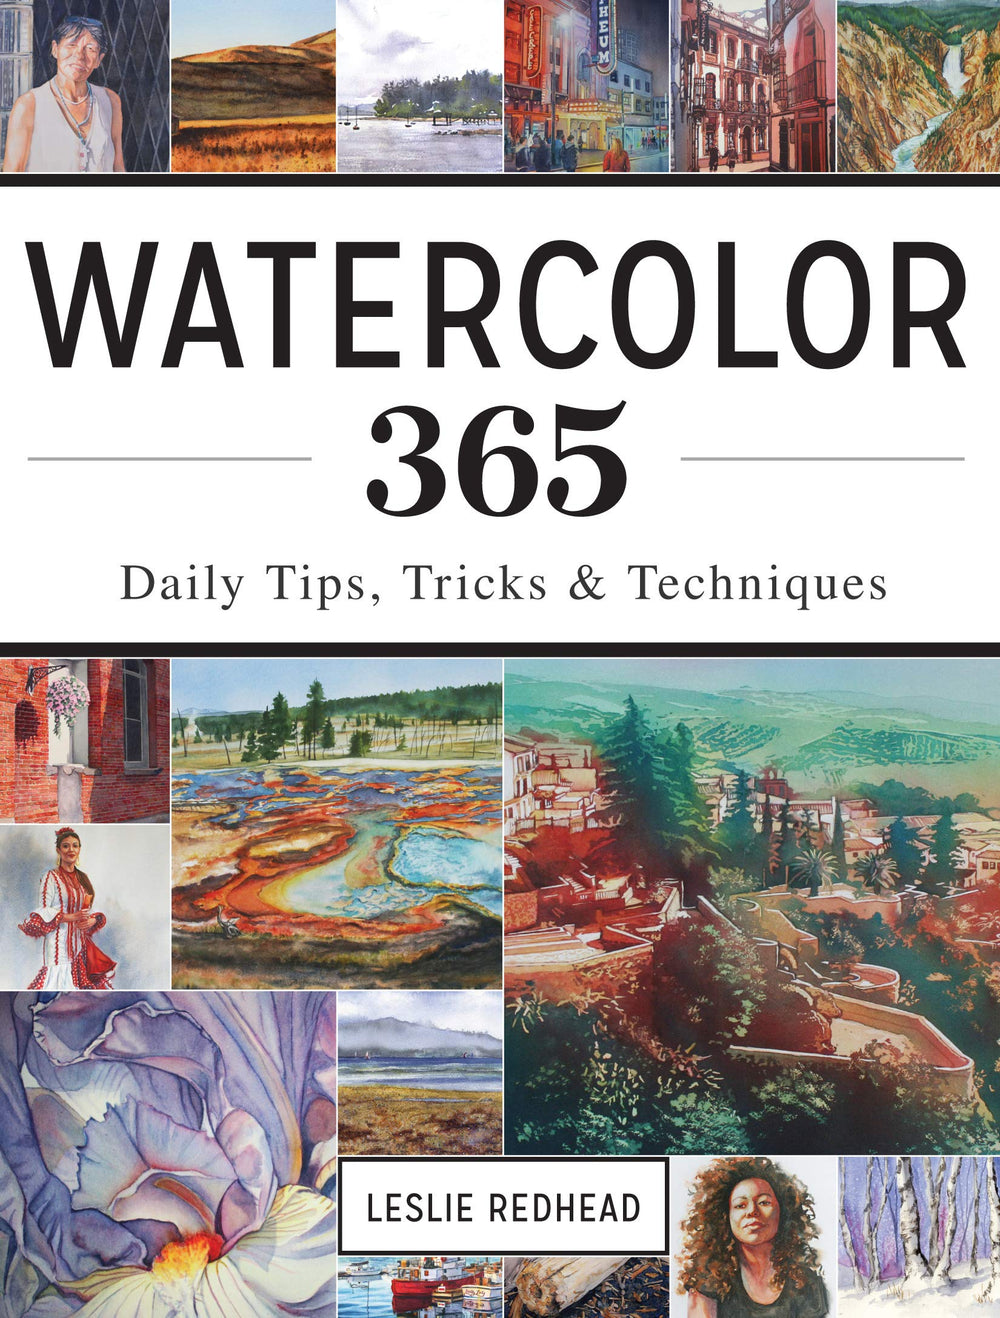 Watercolor 365 Daily Tips by Leslie Redhead